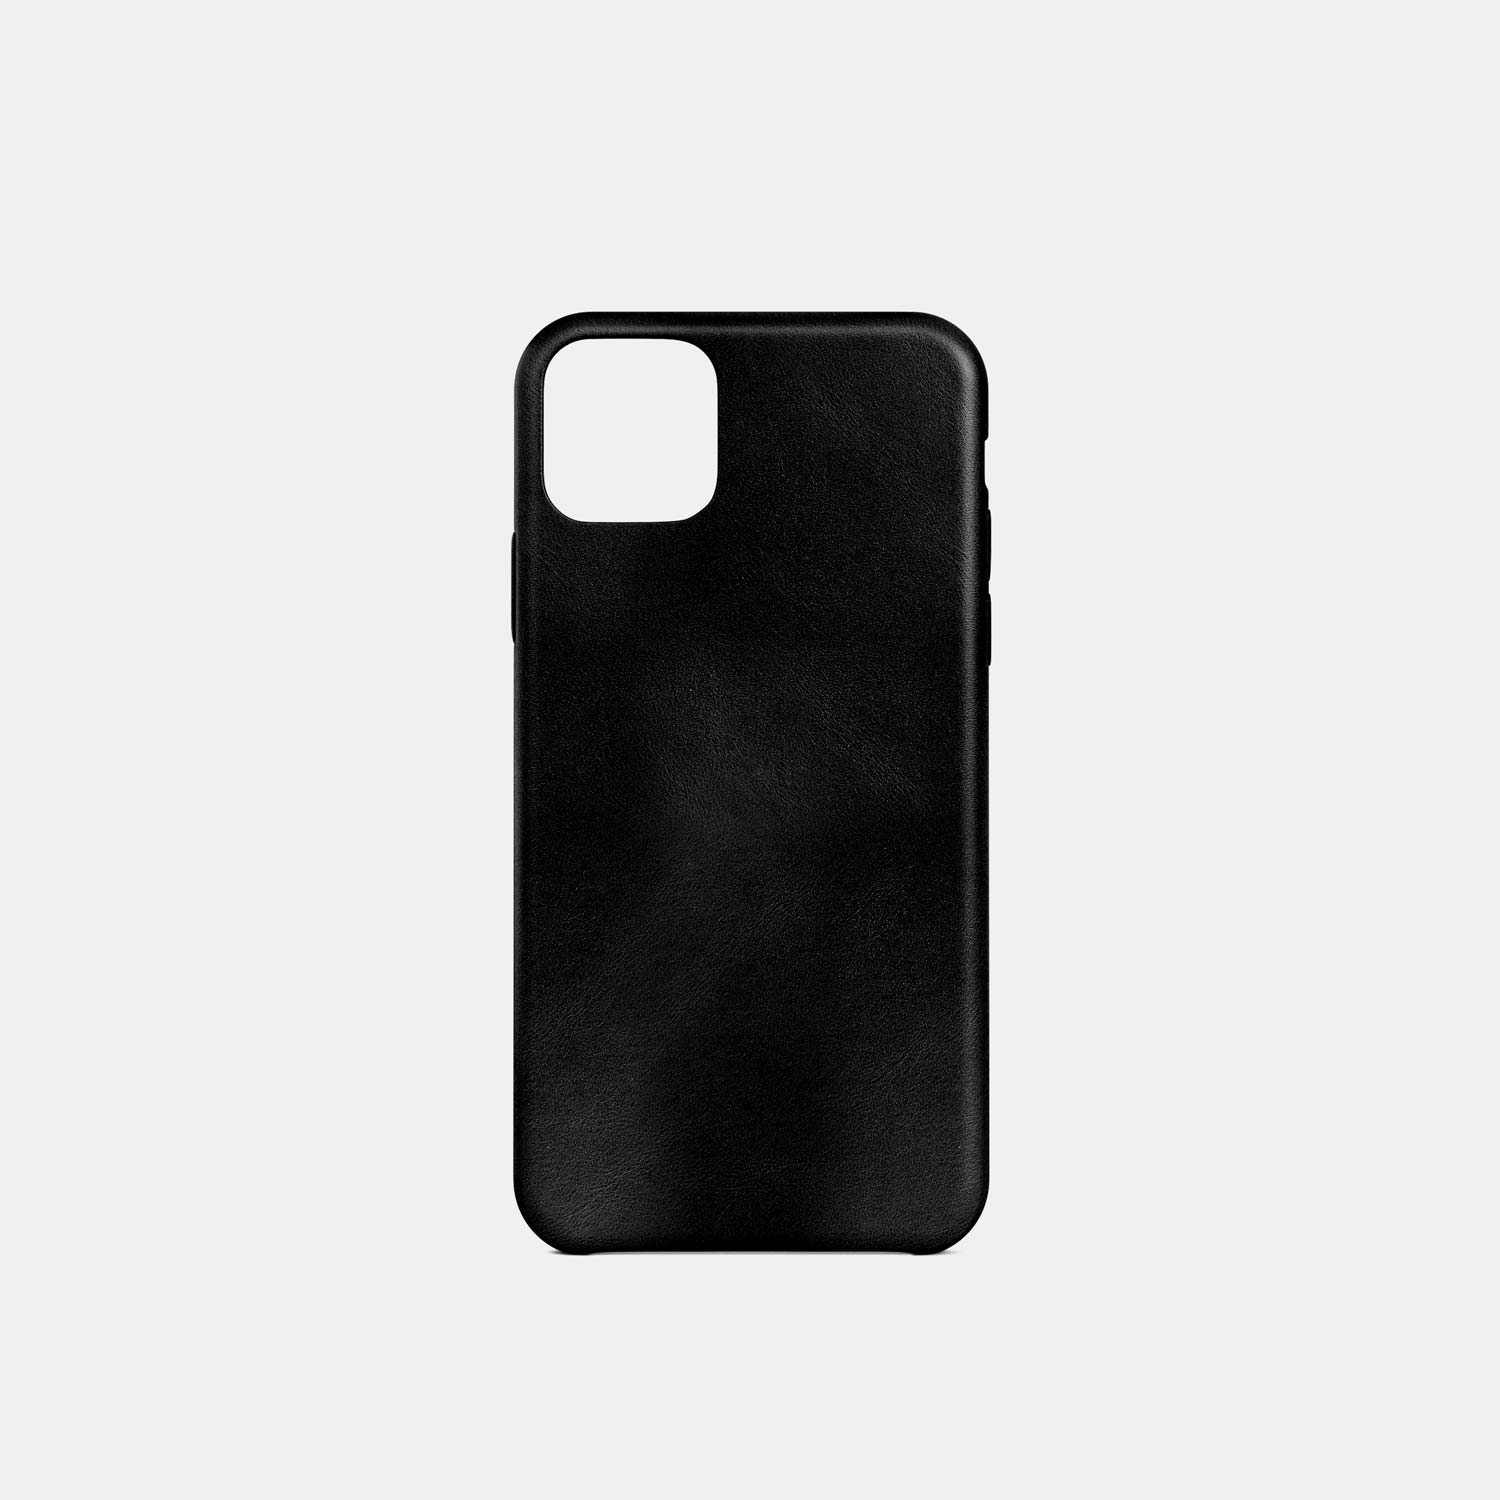 Leather iPhone 12 Pro Max Shell Case - Black - RYAN London